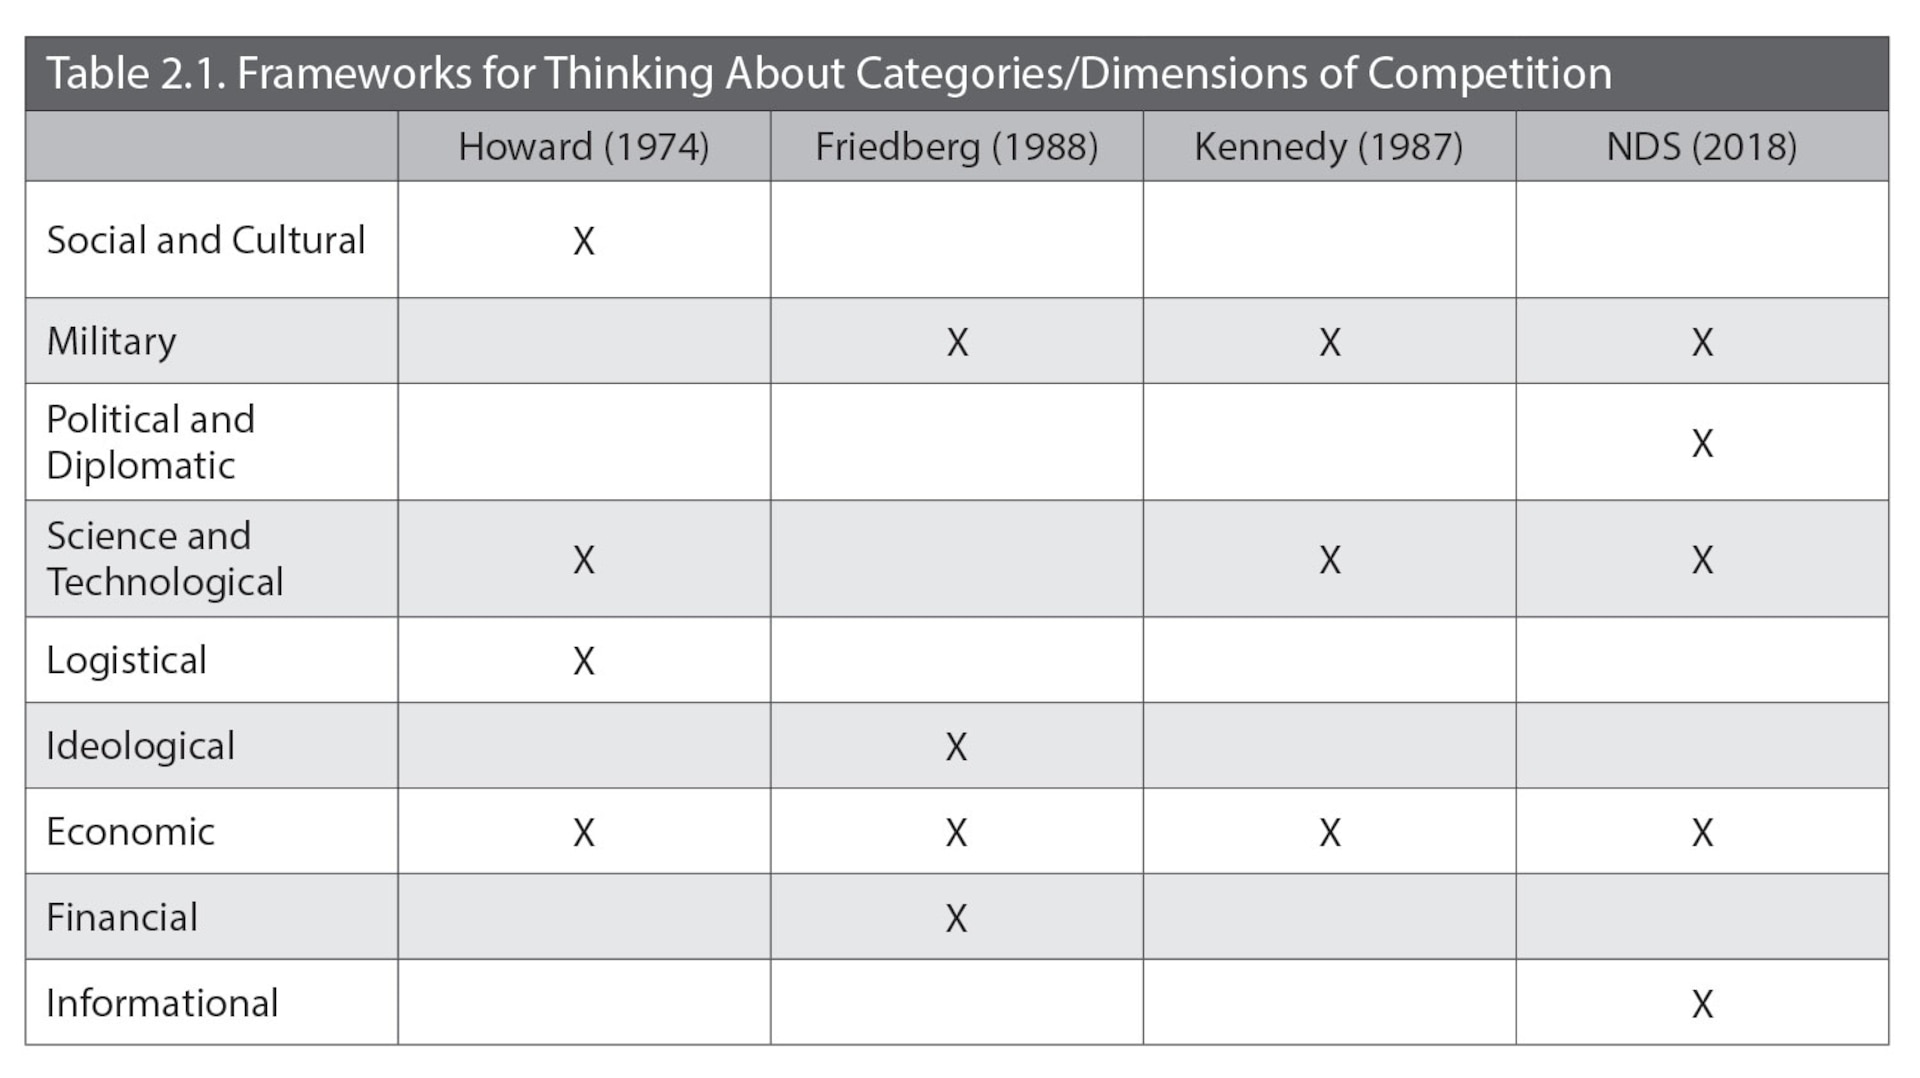 Table 2.1. Frameworks for Thinking About Categories/Dimensions of Competition